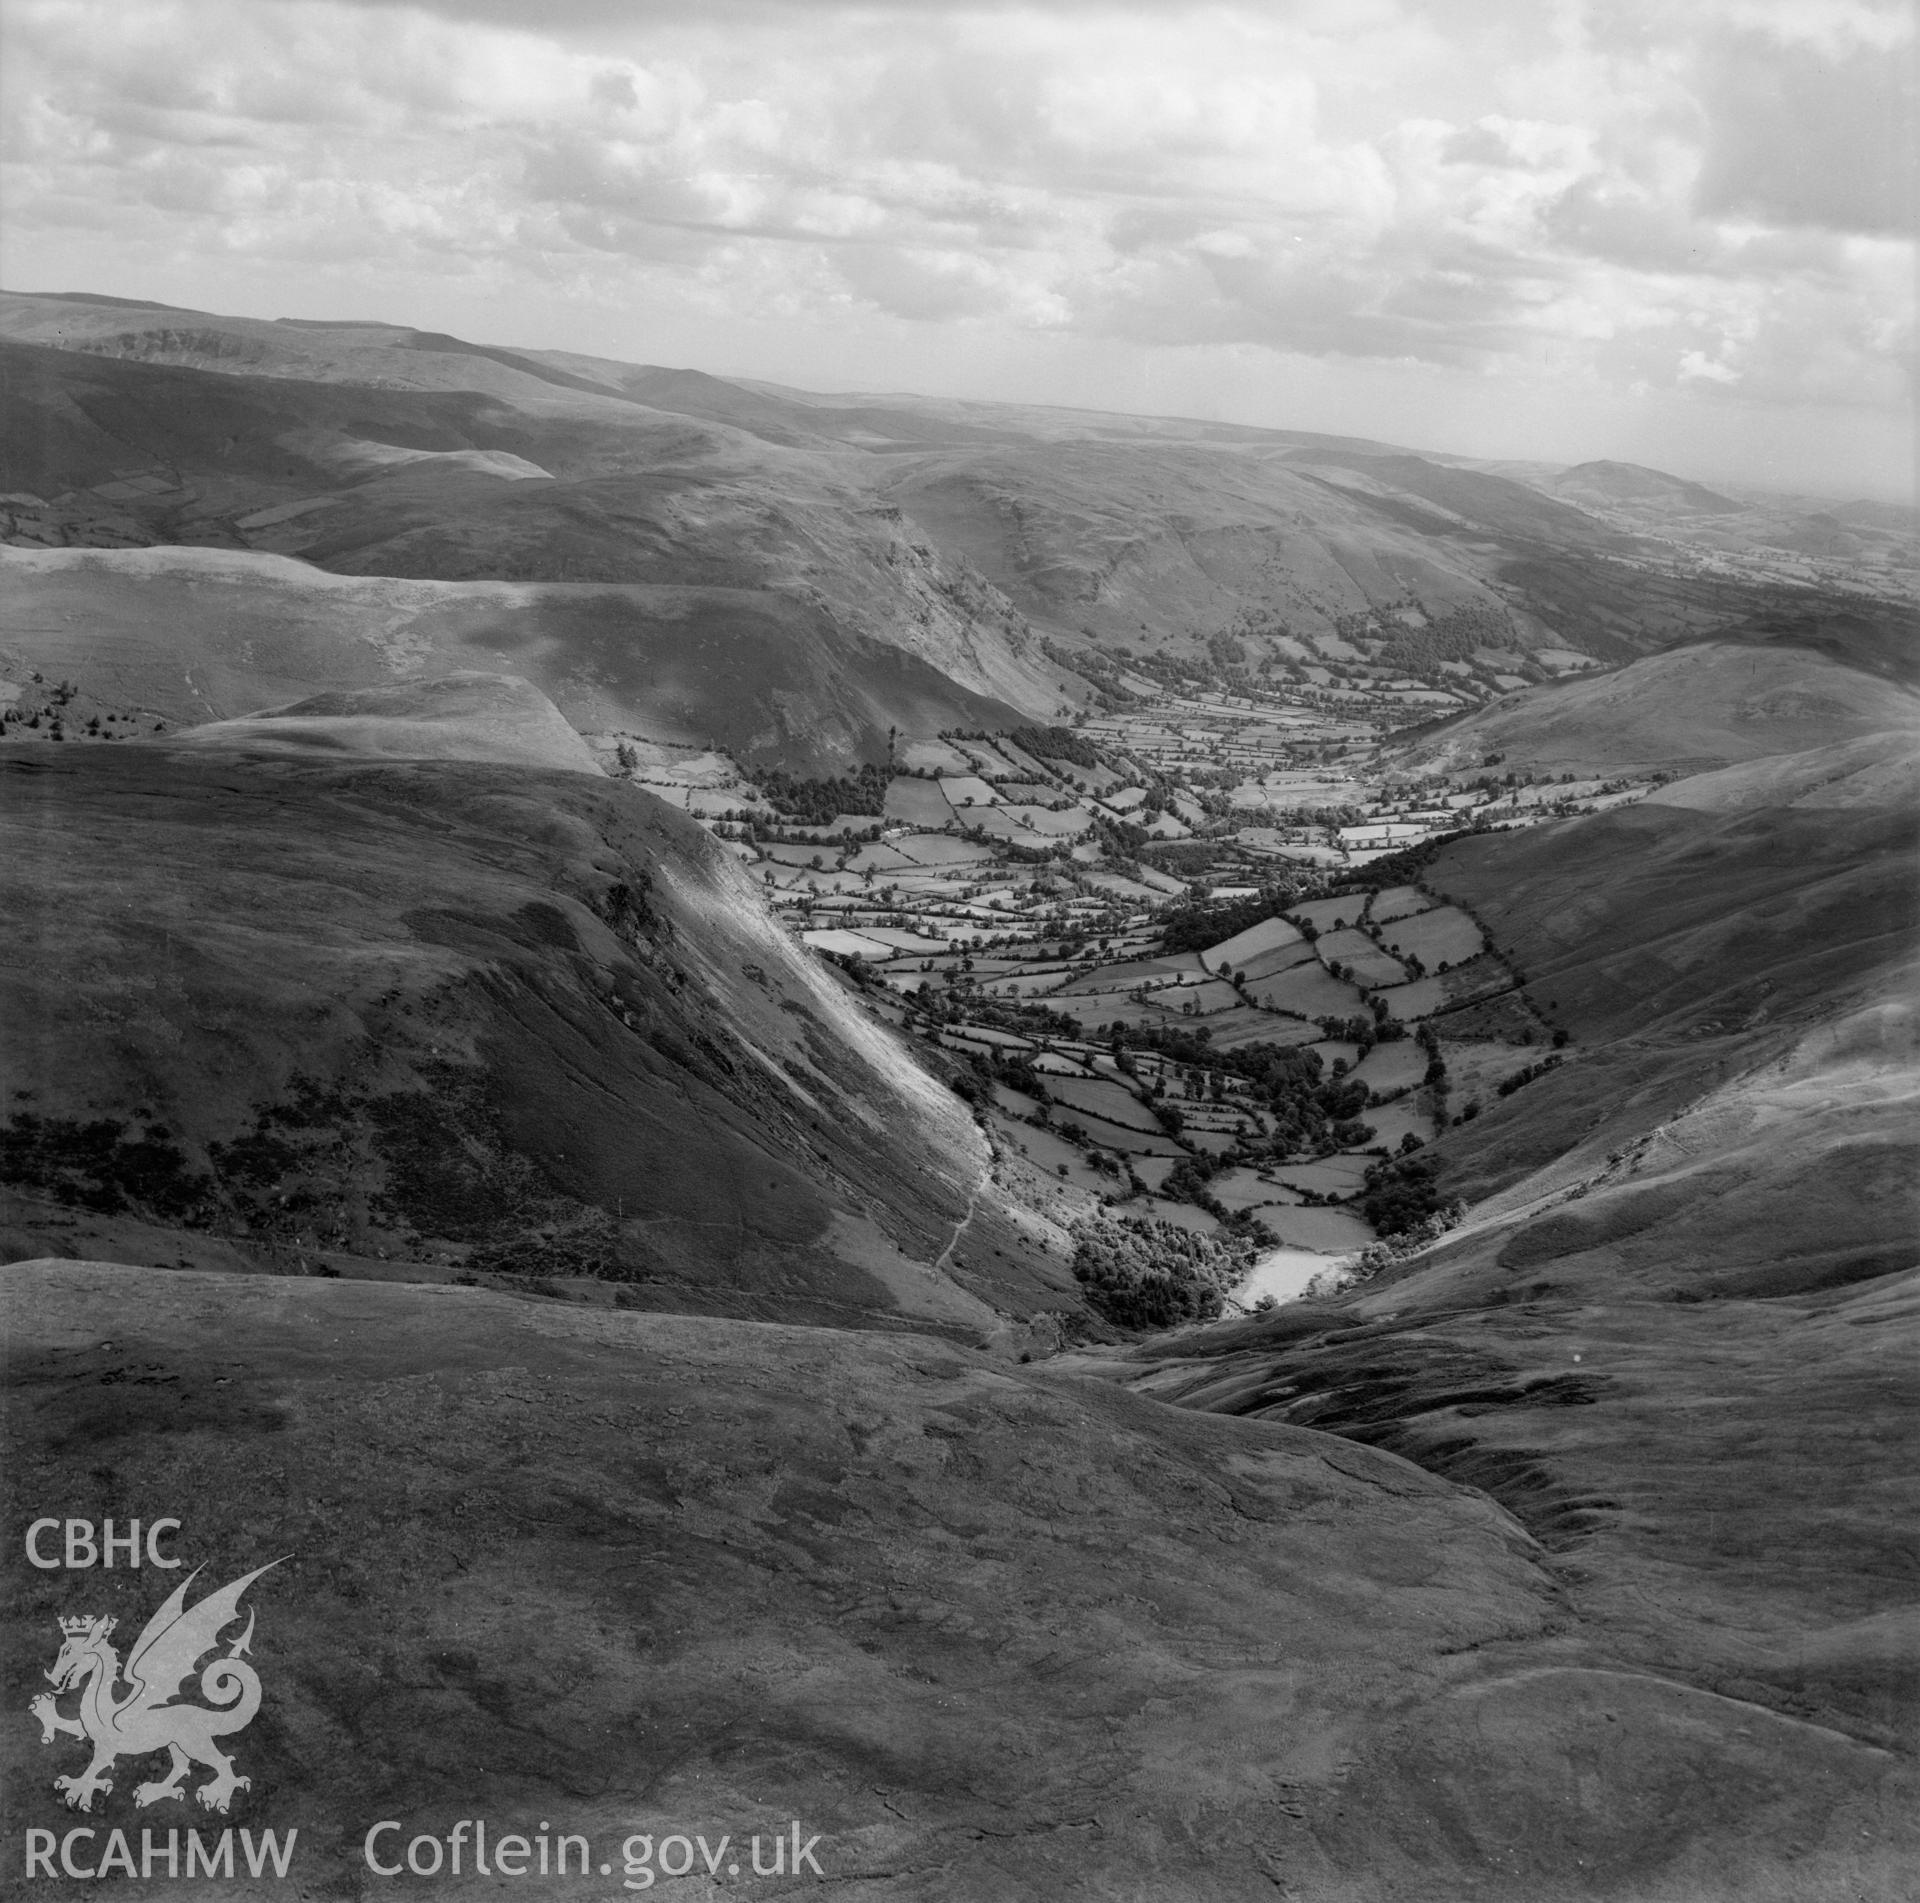 Landscape view of Llangynog valley looking east